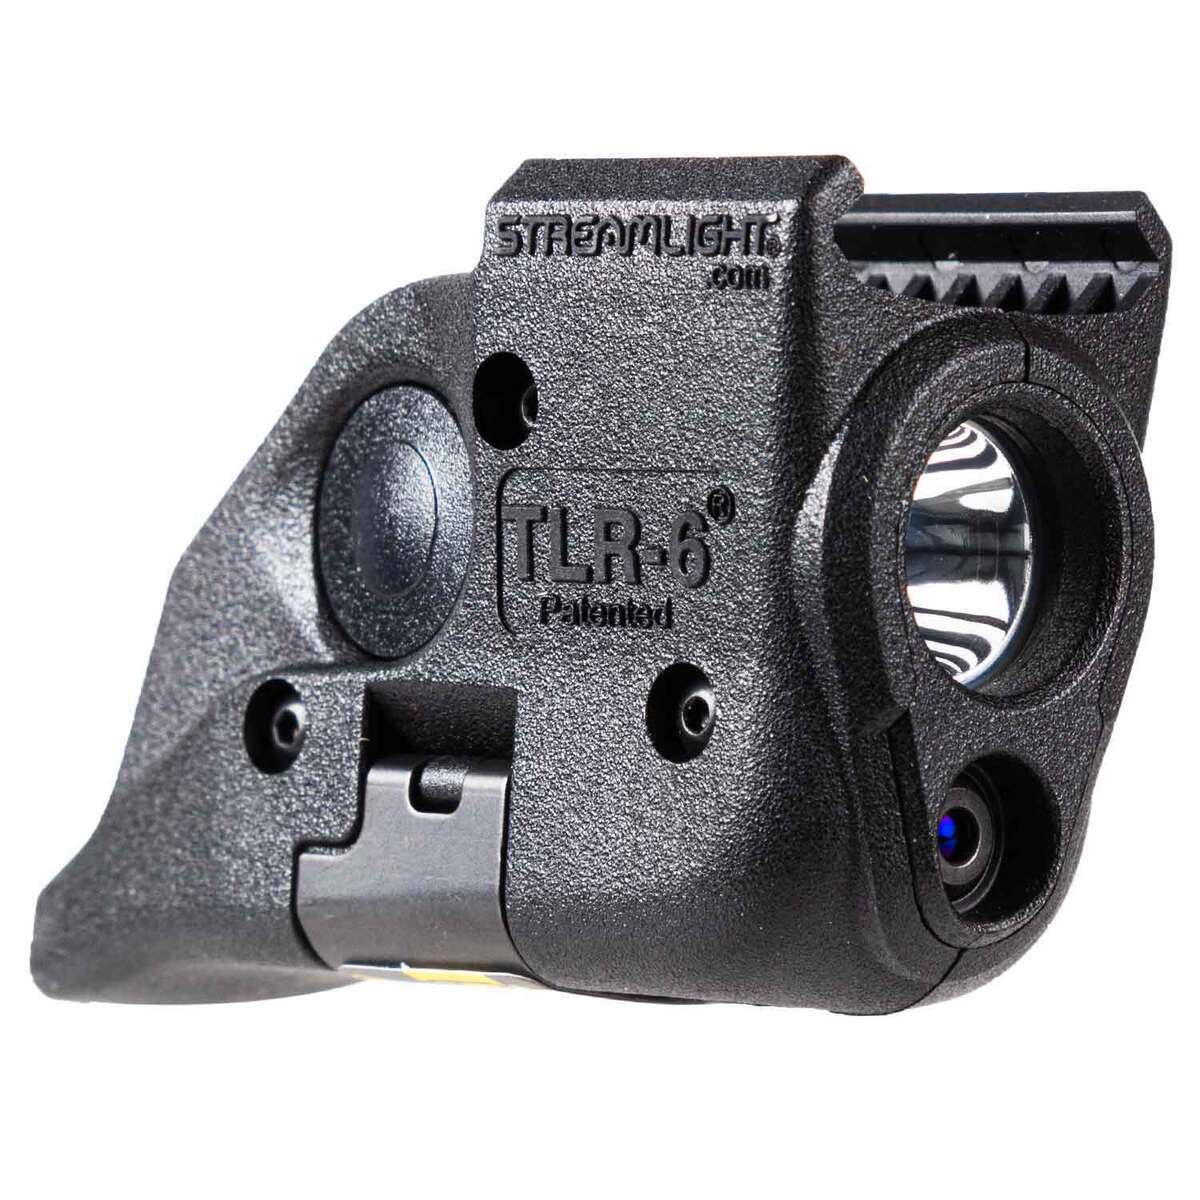 Streamlight TLR-6 Tactical Light With Red Laser Glock 26, 27, 33  Sportsman's Warehouse